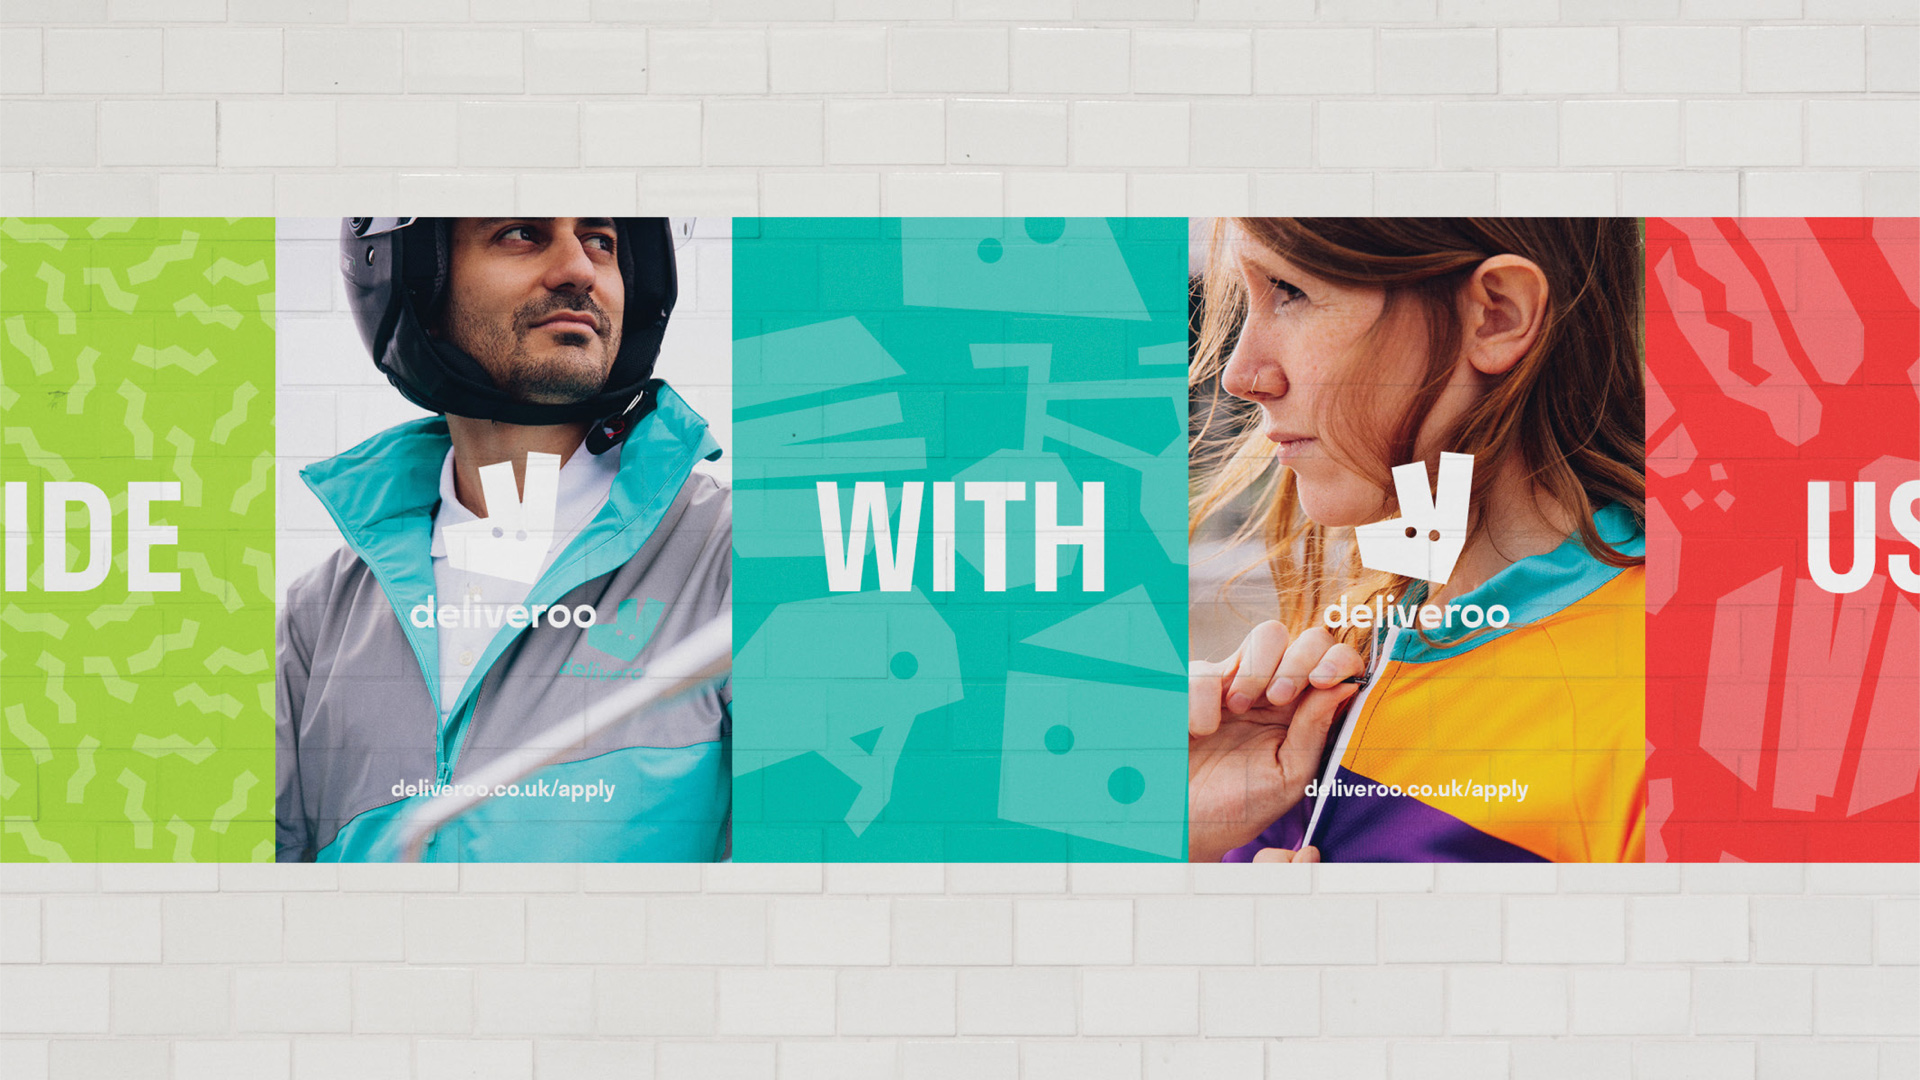 5 Minutes with Simon from Deliveroo on Their New Visual Identity